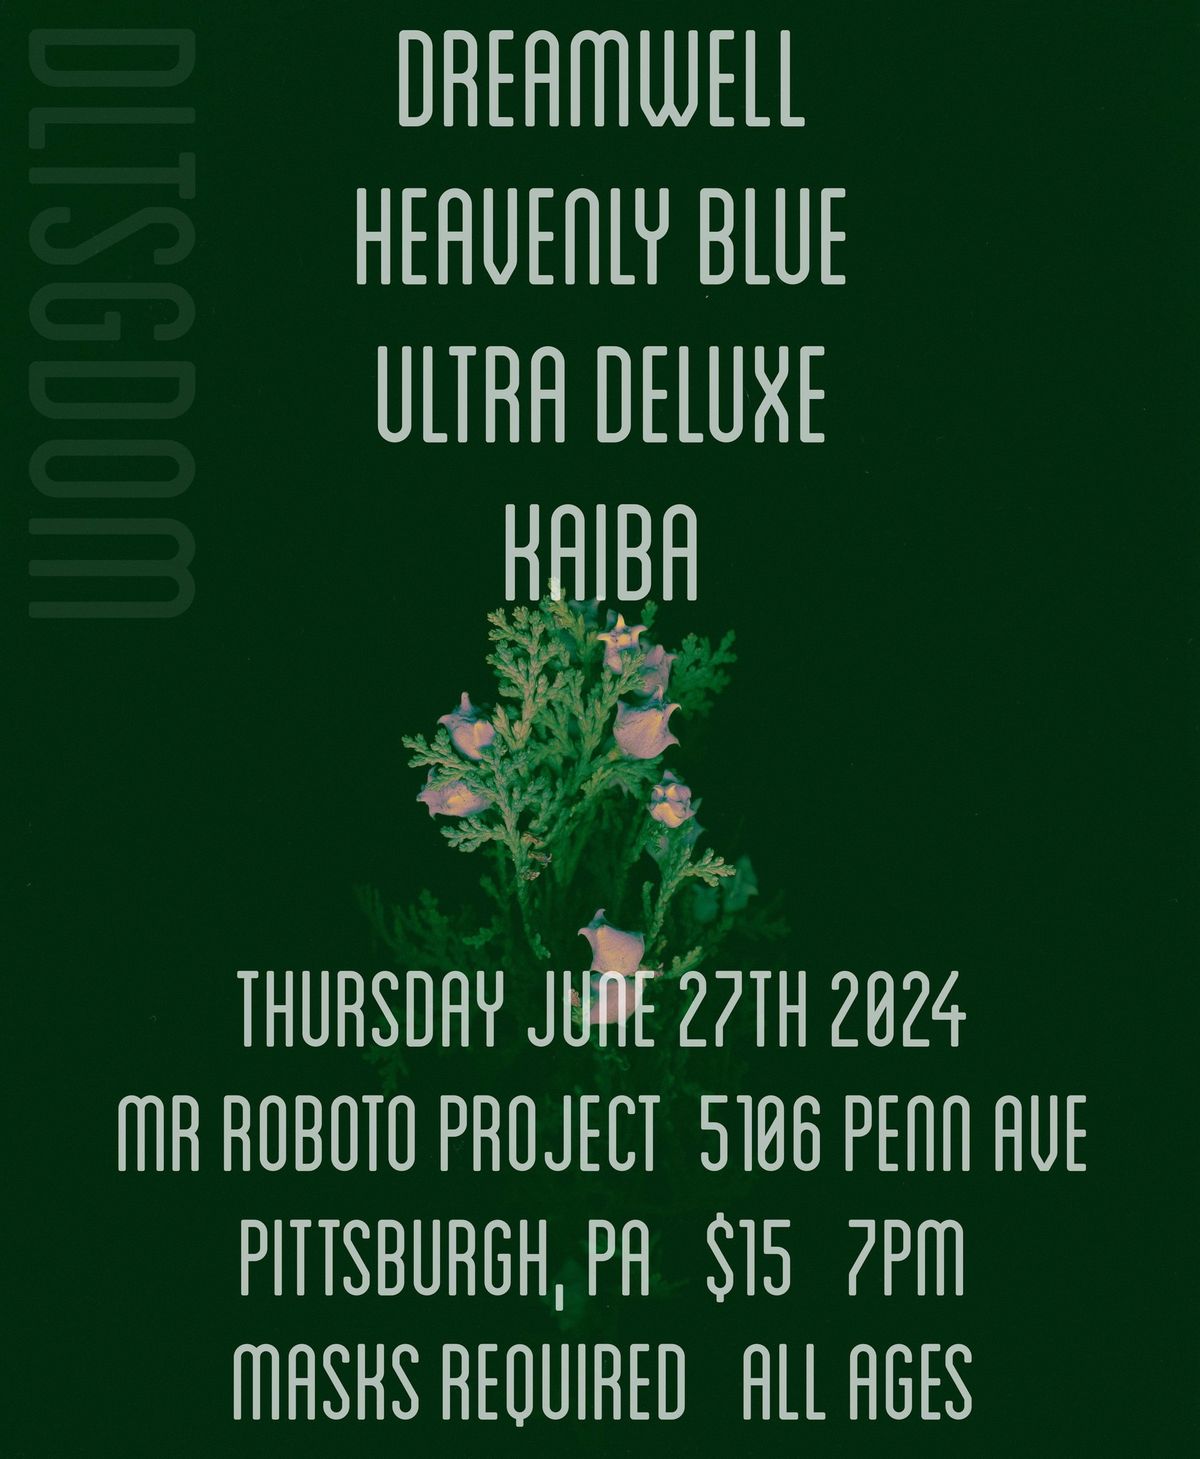 Dreamwell w\/ Heavenly Blue + Ultra Deluxe + Kaiba at Roboto